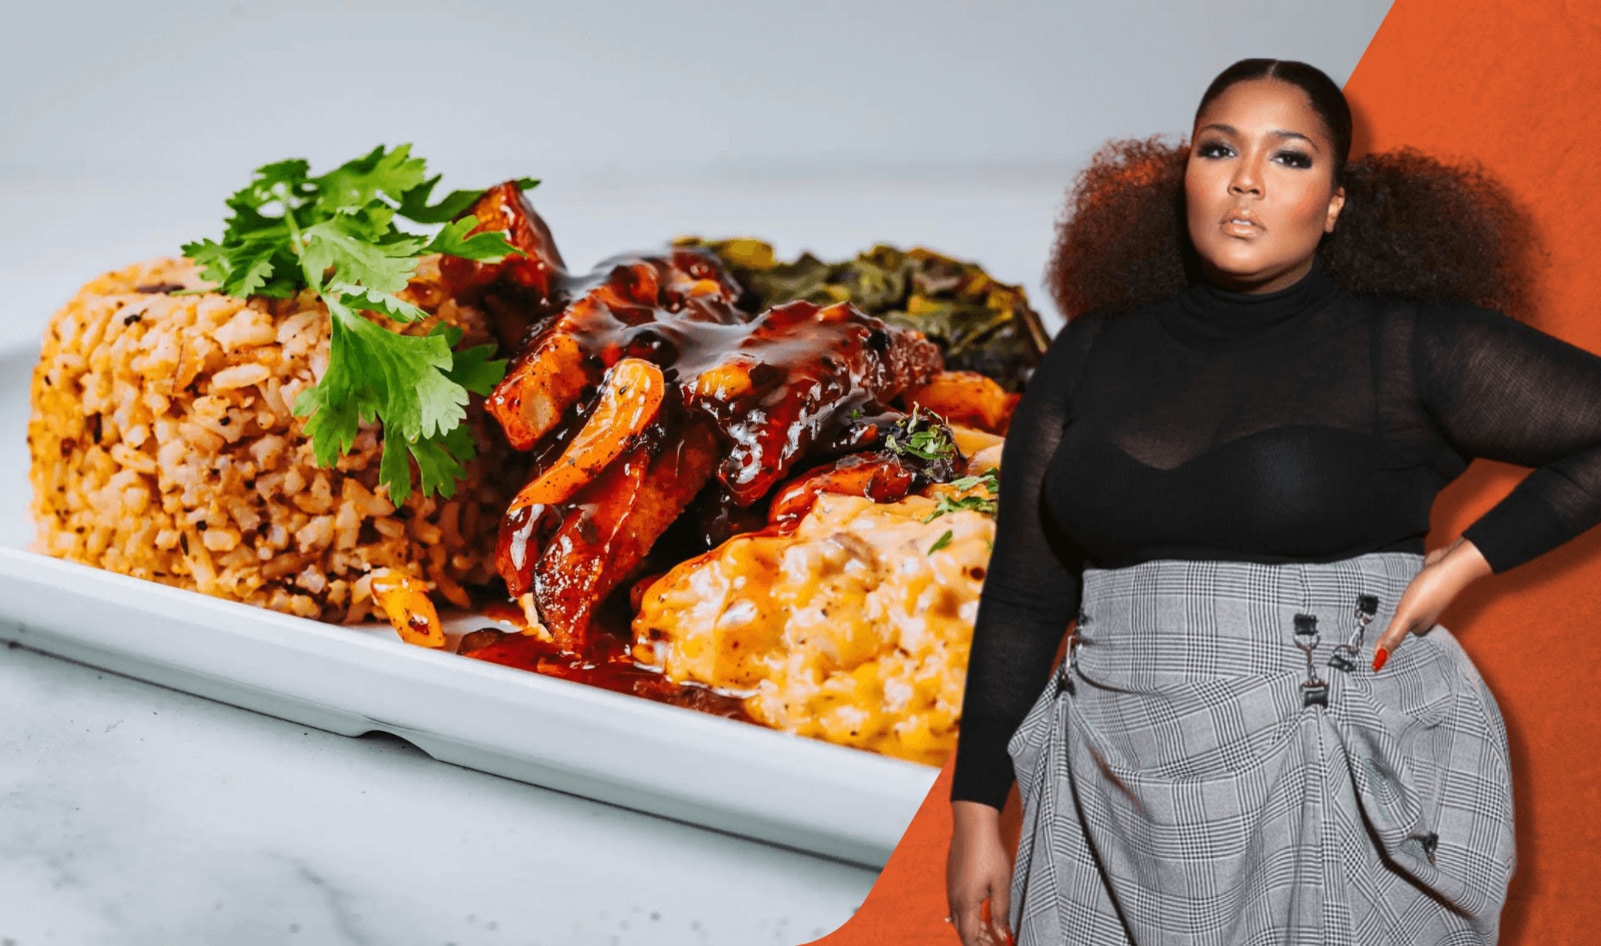 Lizzo Just Found Her Favorite Vegan Restaurant. These 3 Dishes Blew Her Mind.